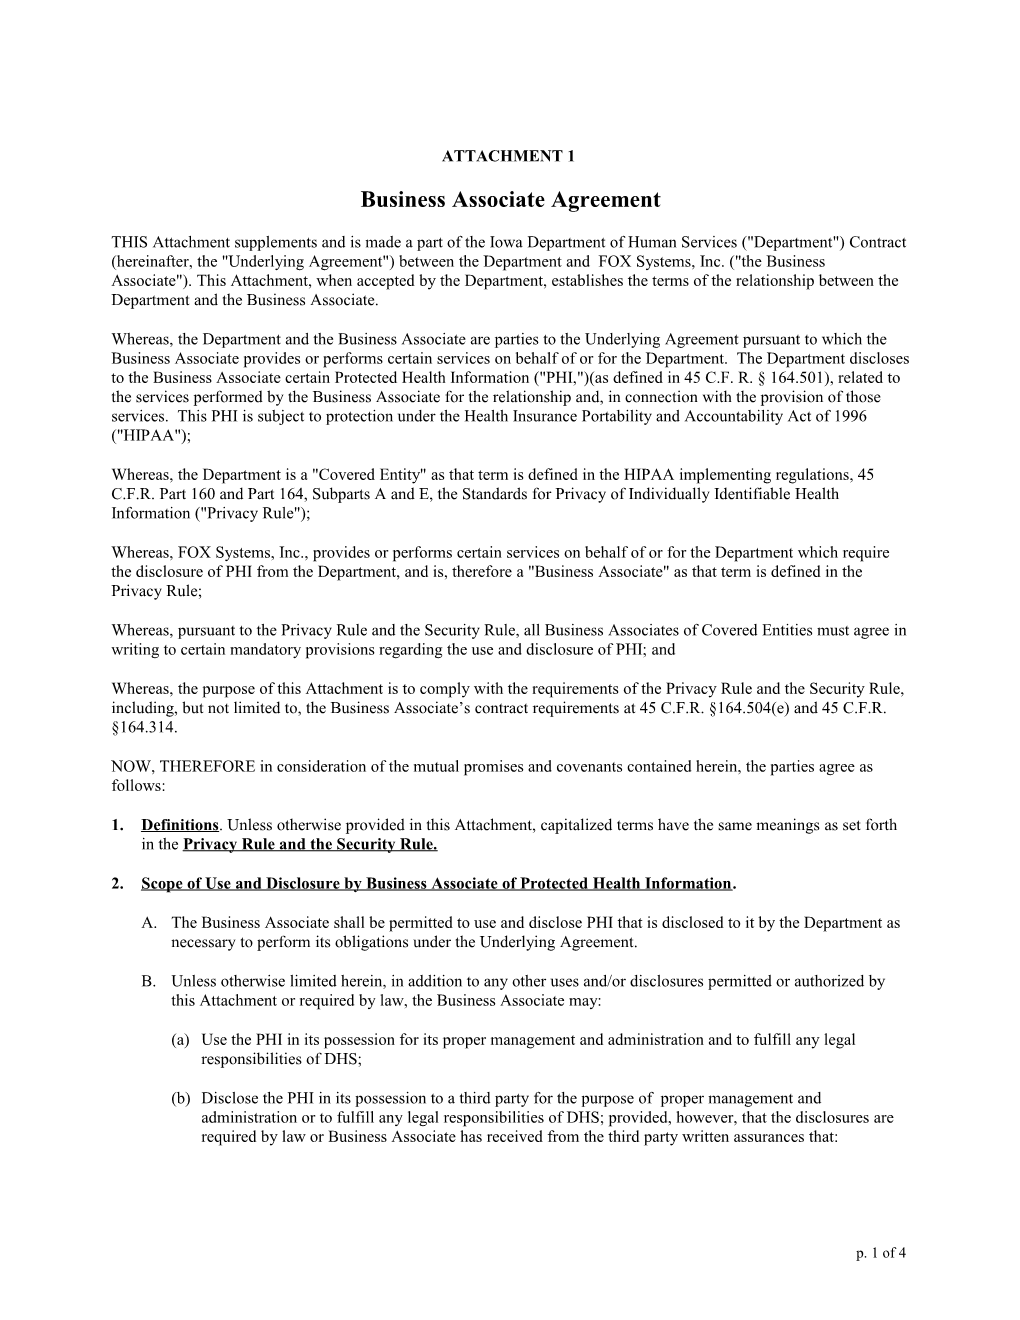 Addendum to Iowa Department of Human Services Contract